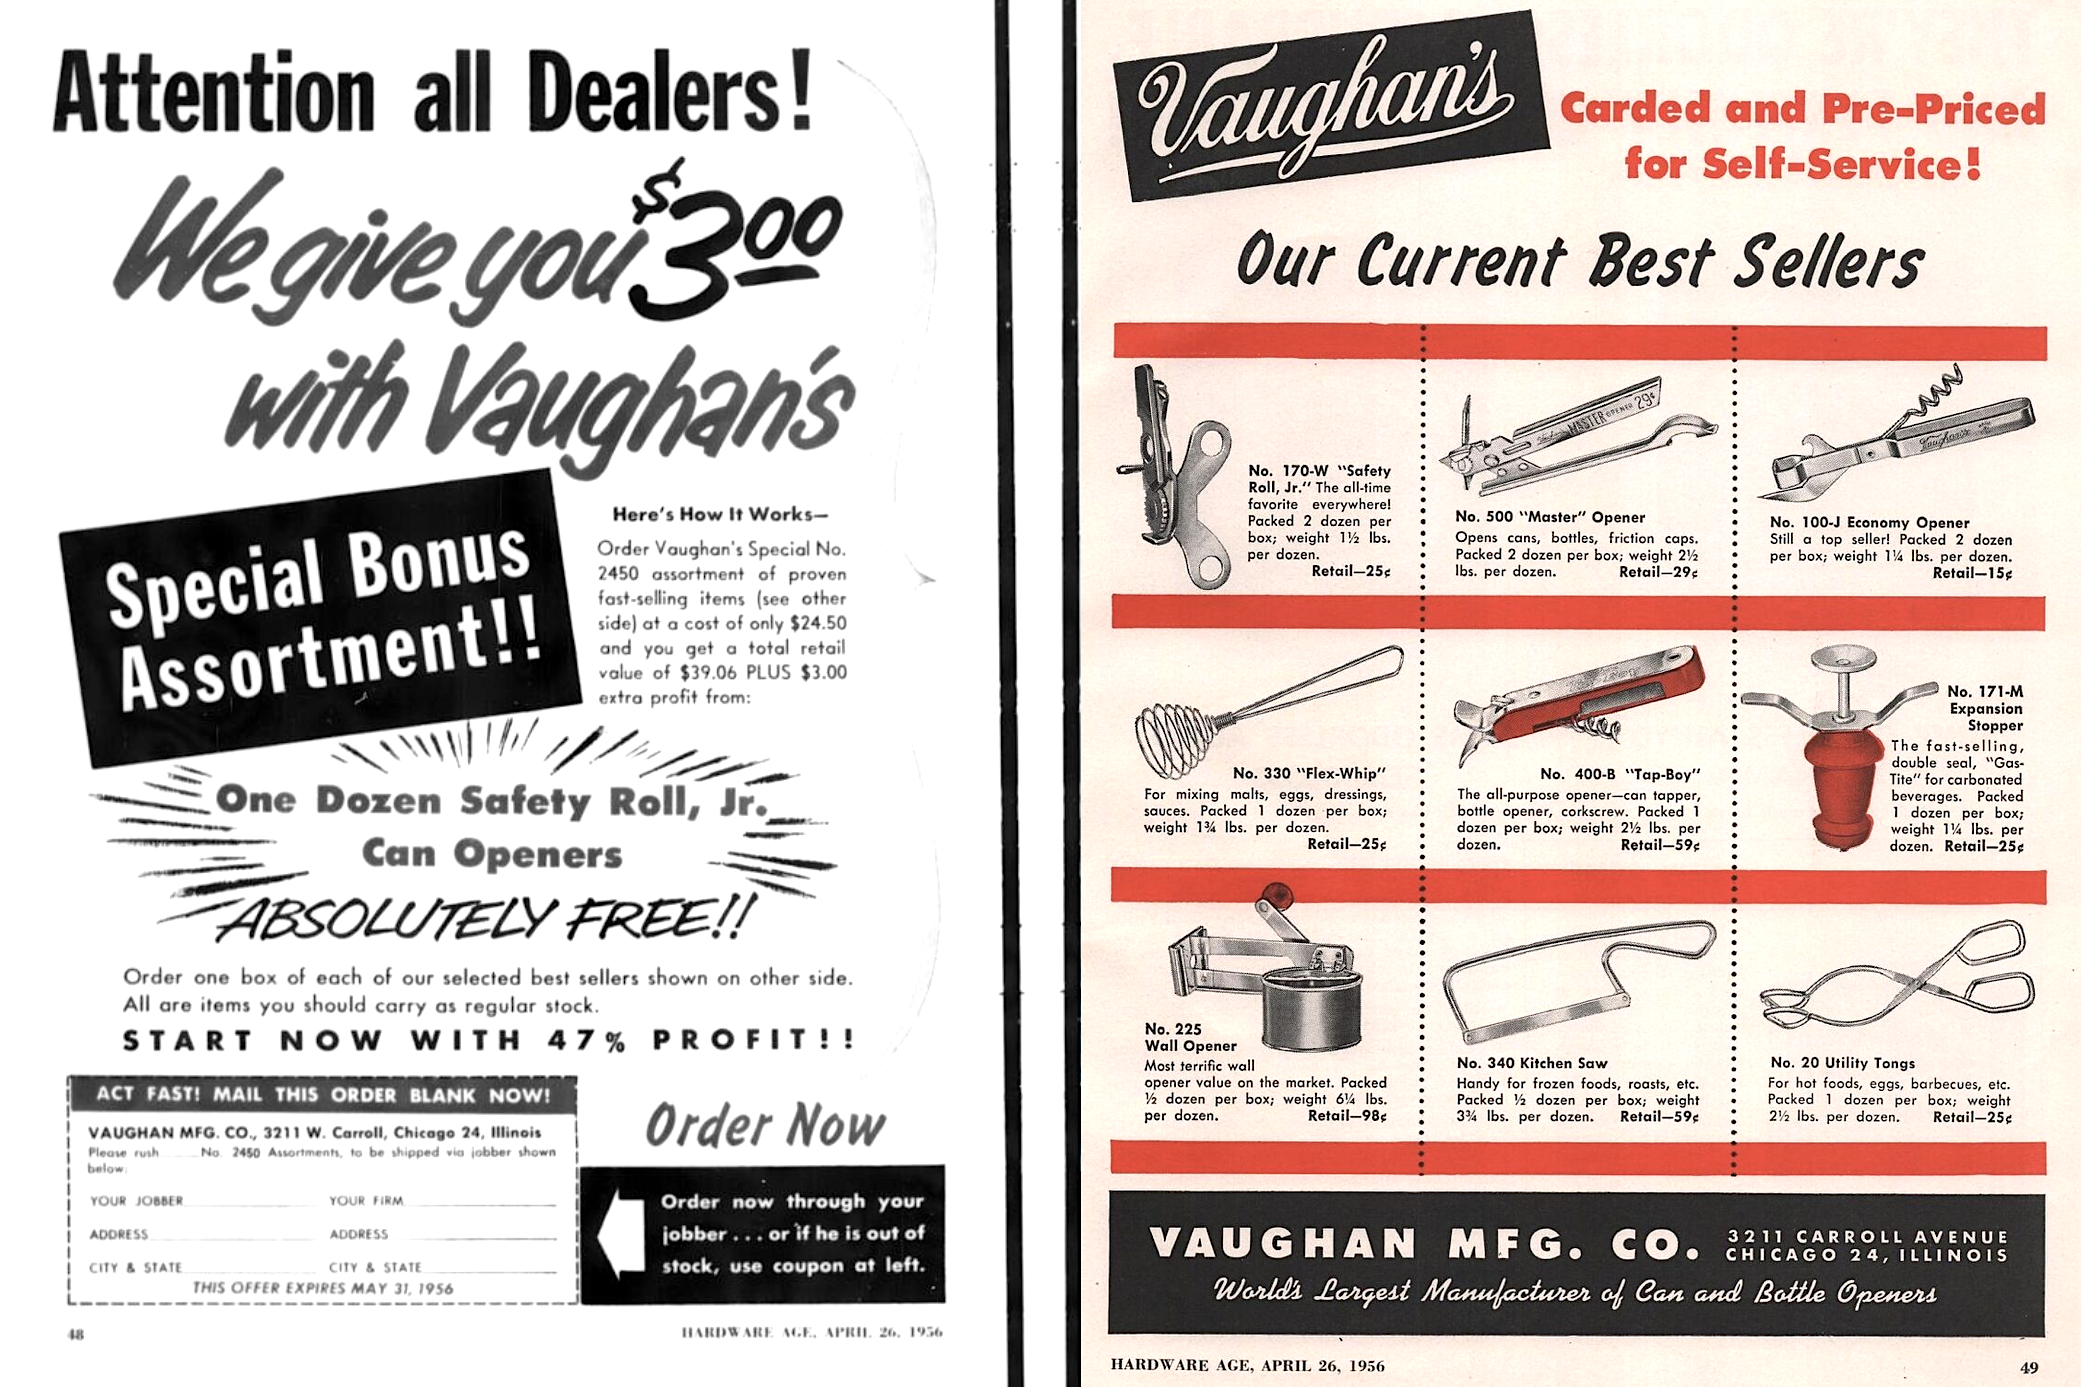 http://www.madeinchicagomuseum.com/wp-content/uploads/2016/05/vaughan-1950s-centerfold-ad.png